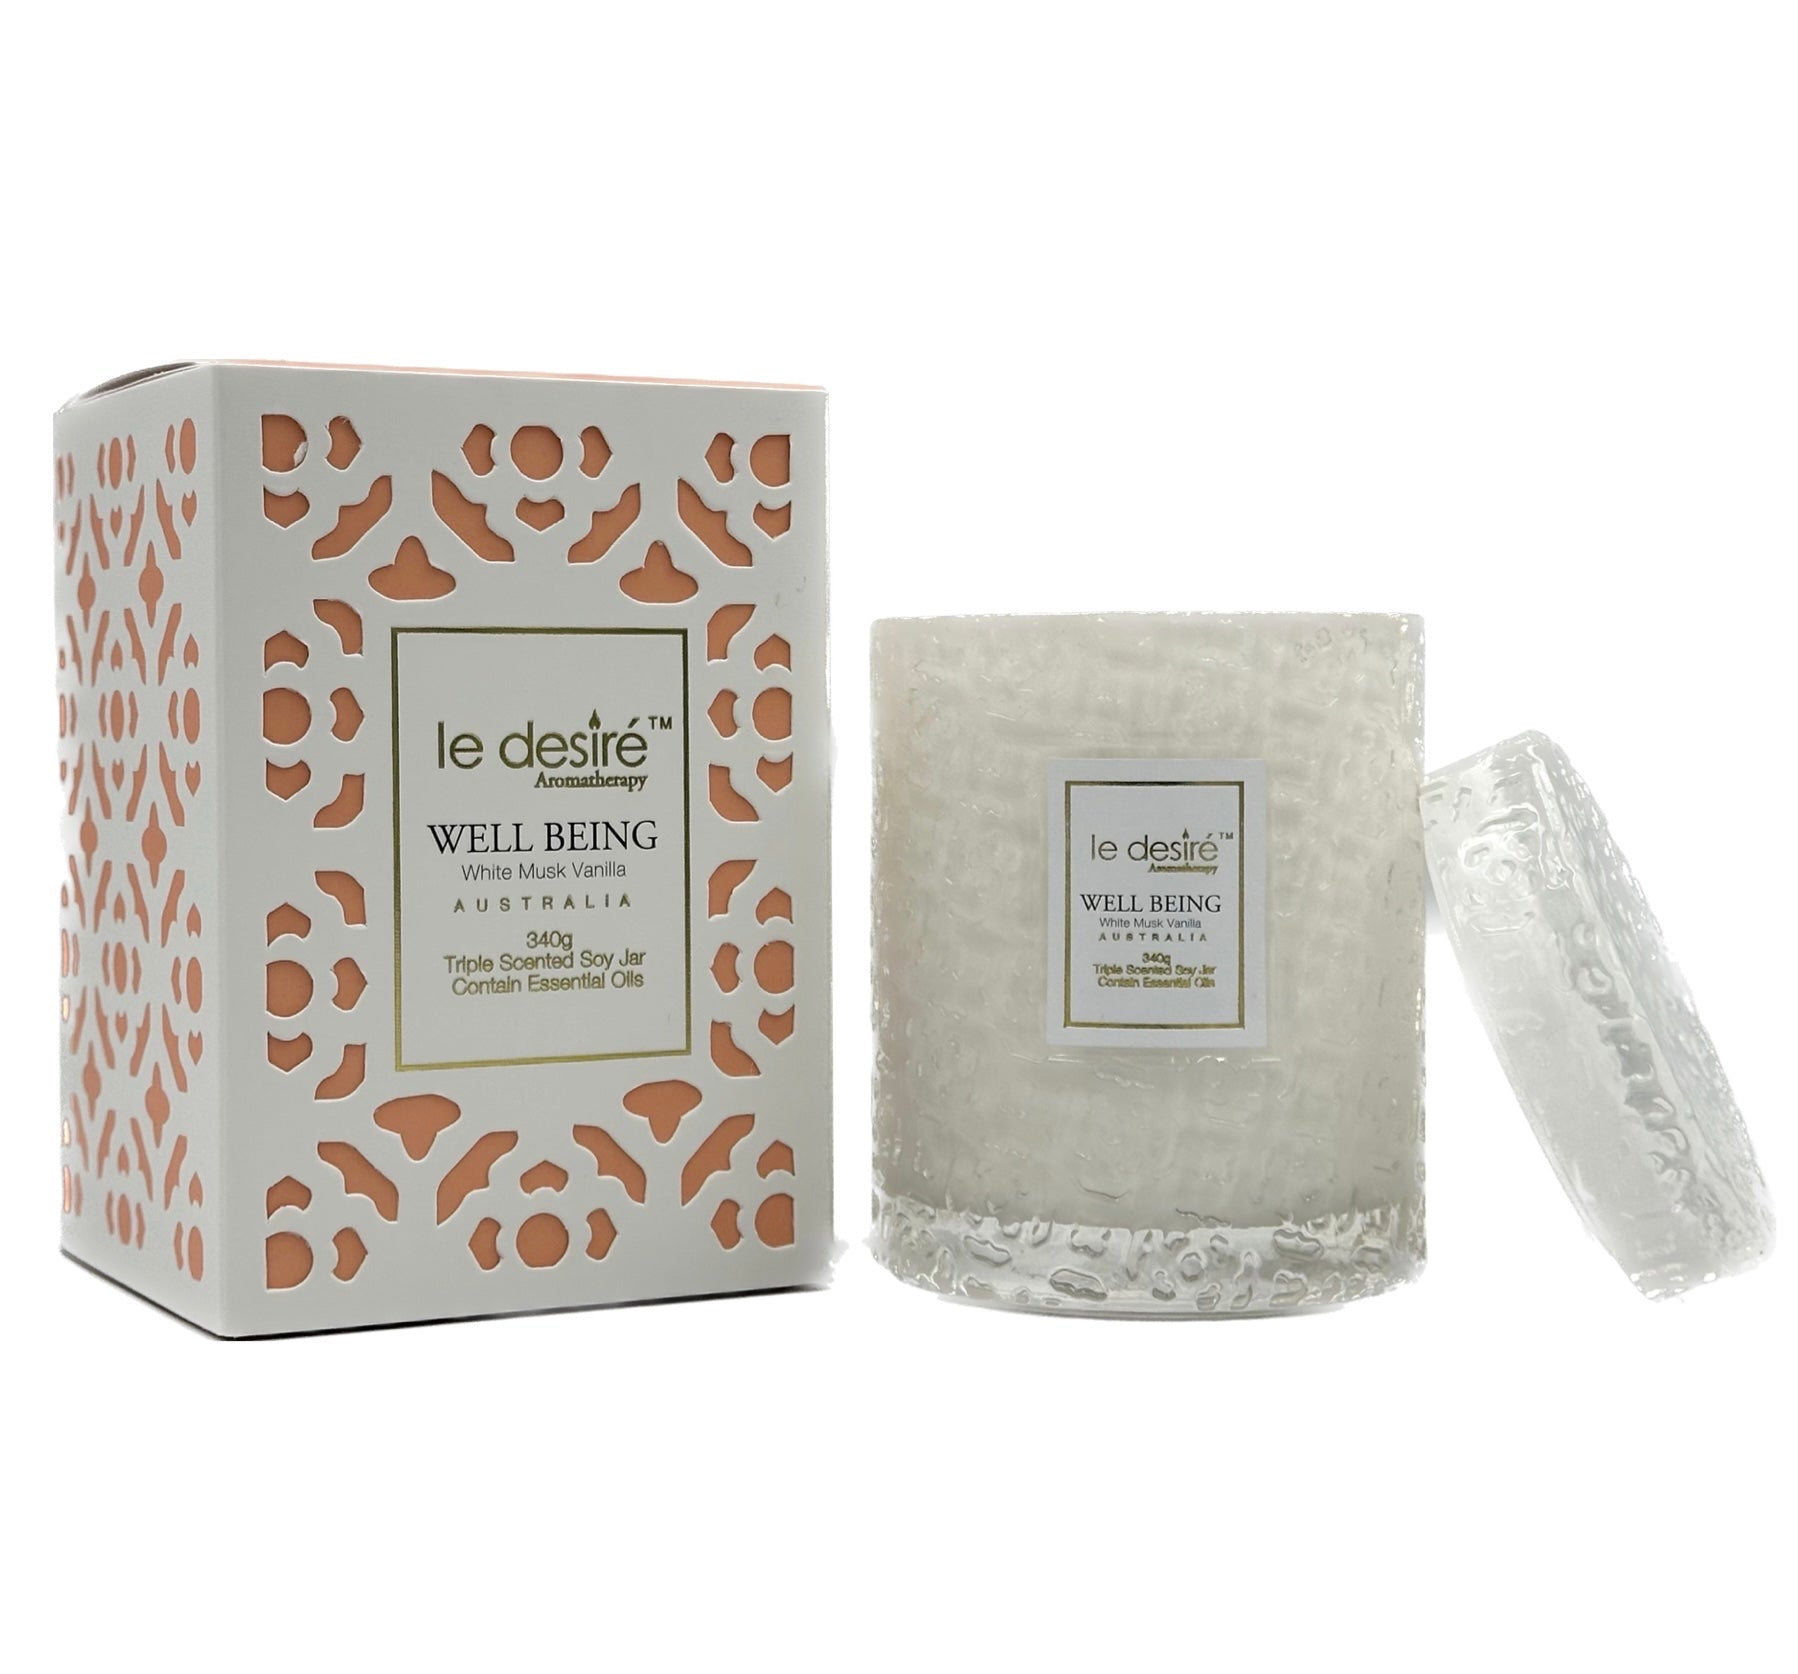 Well Being (White Musk Vanilla) - Aromatherapy Soy Candle